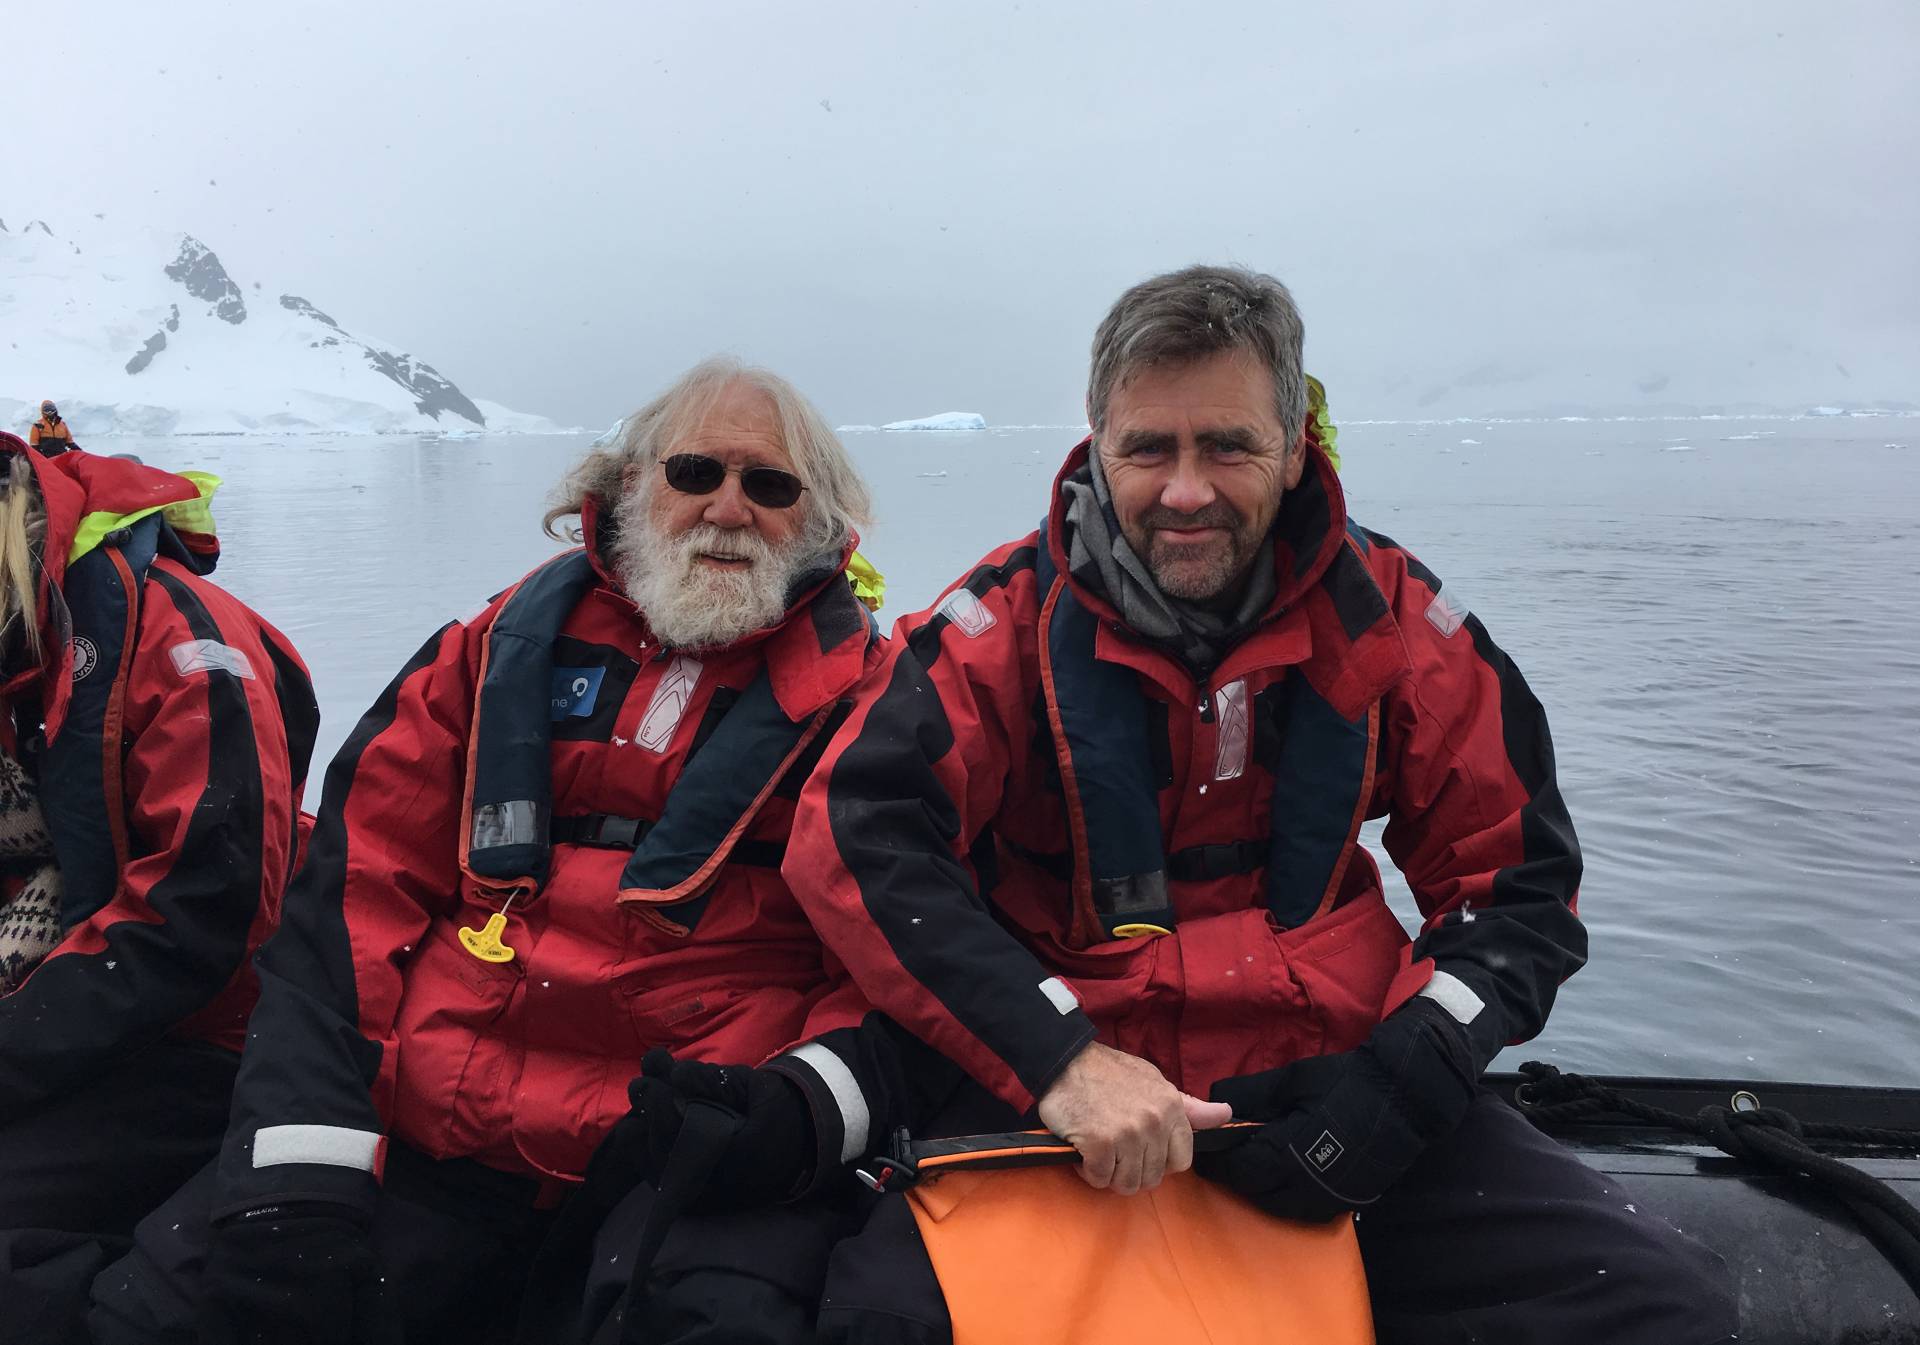 Charlie Gross and Tom Albright sitting in a boat in Antarctica